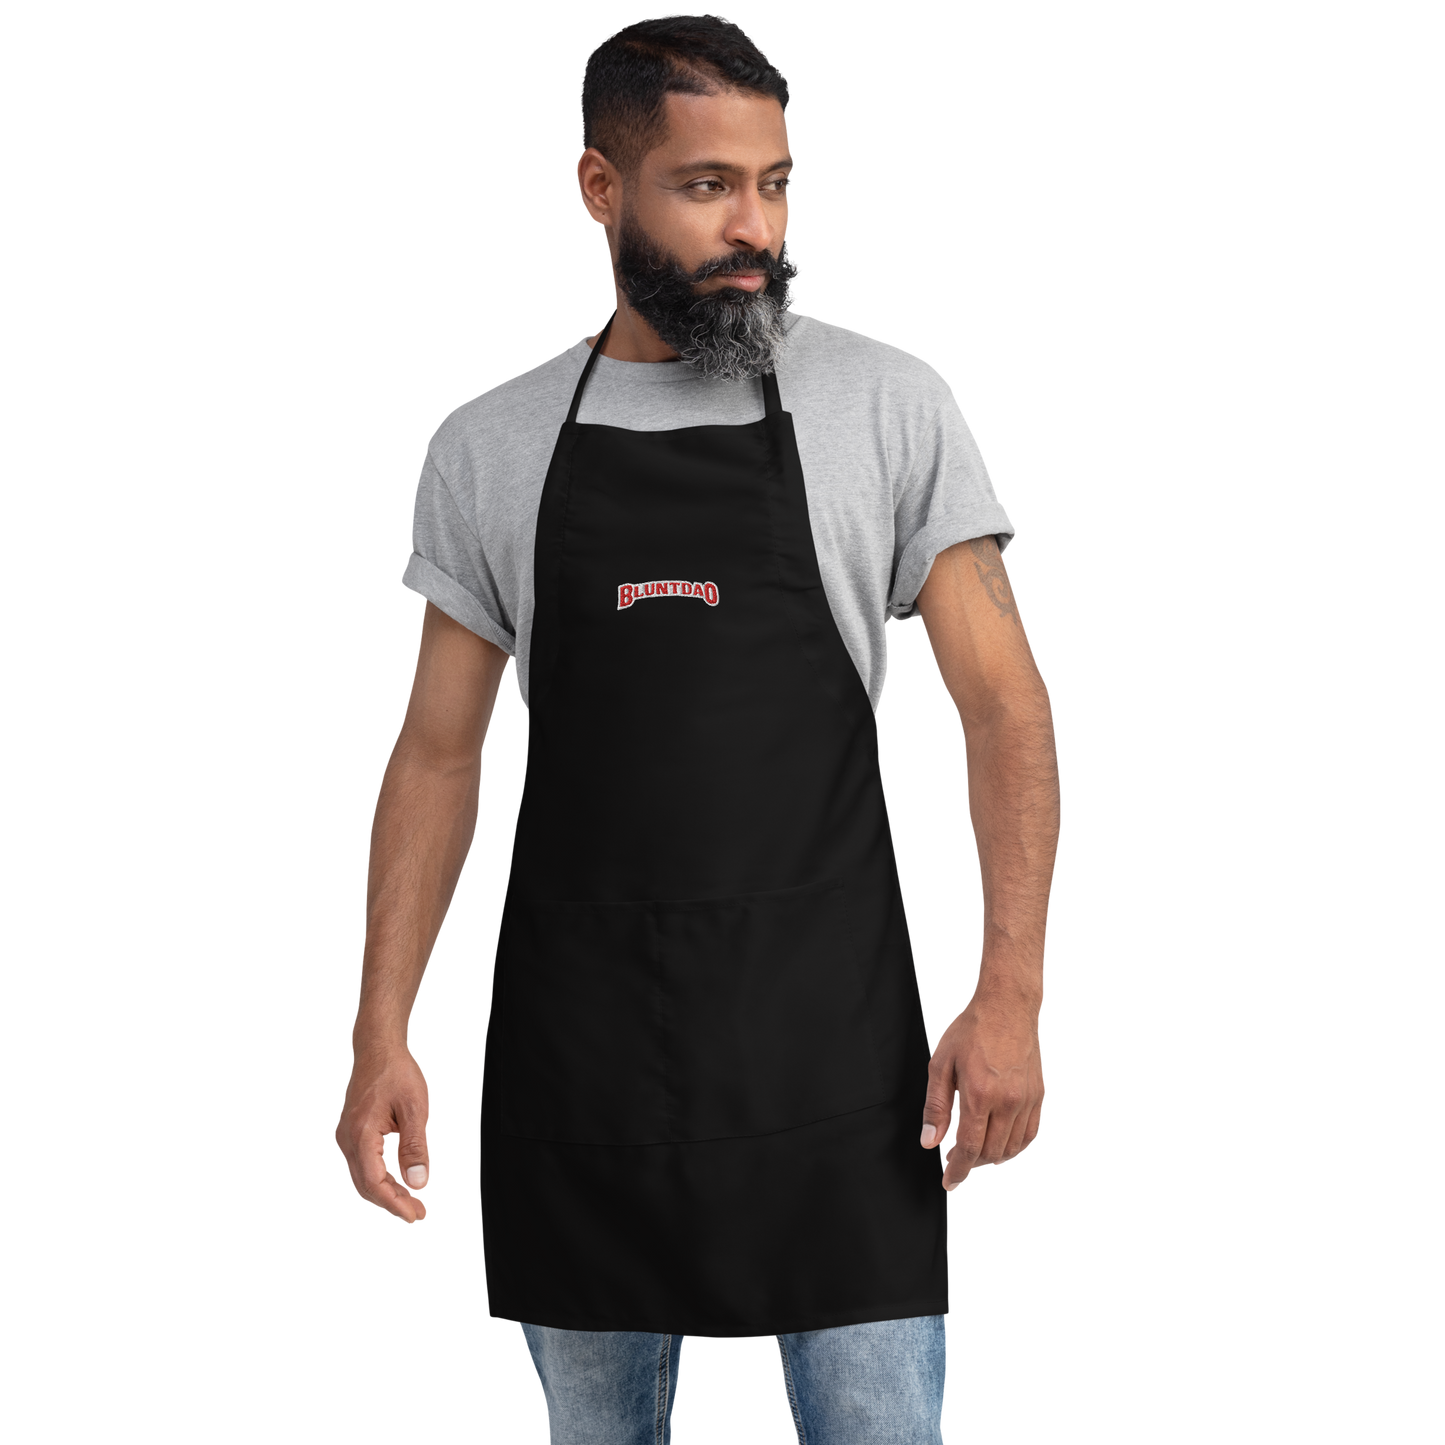 BluntDAO Embroidered Apron